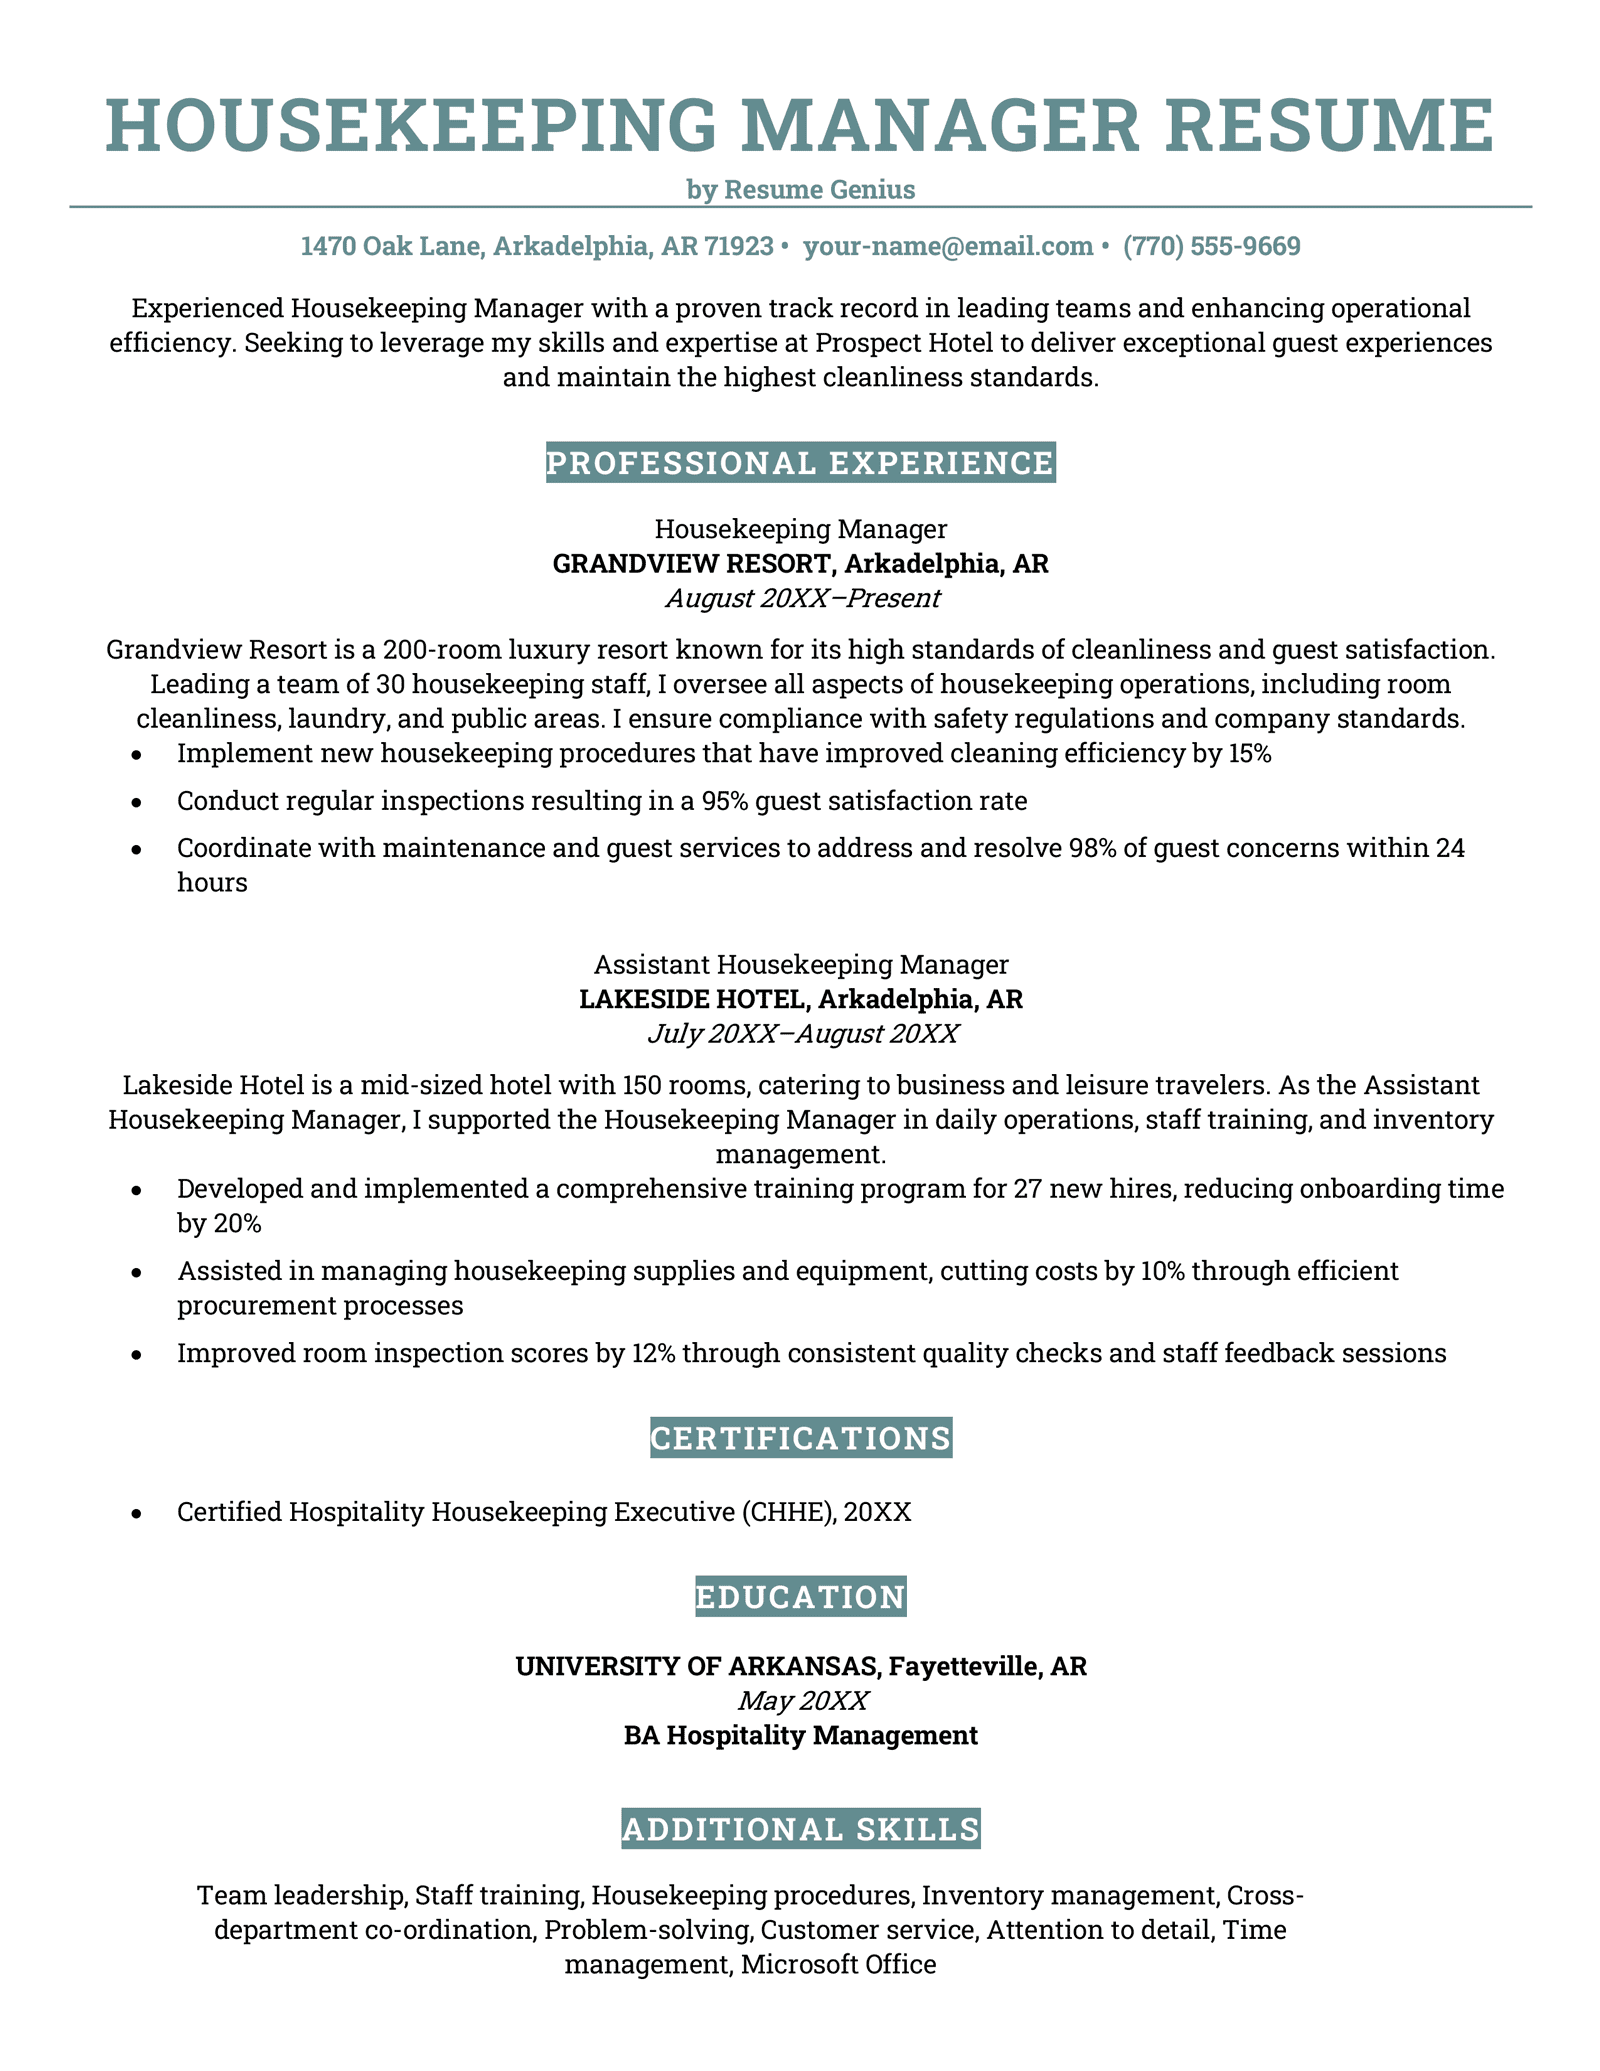 A housekeeping manager resume. 